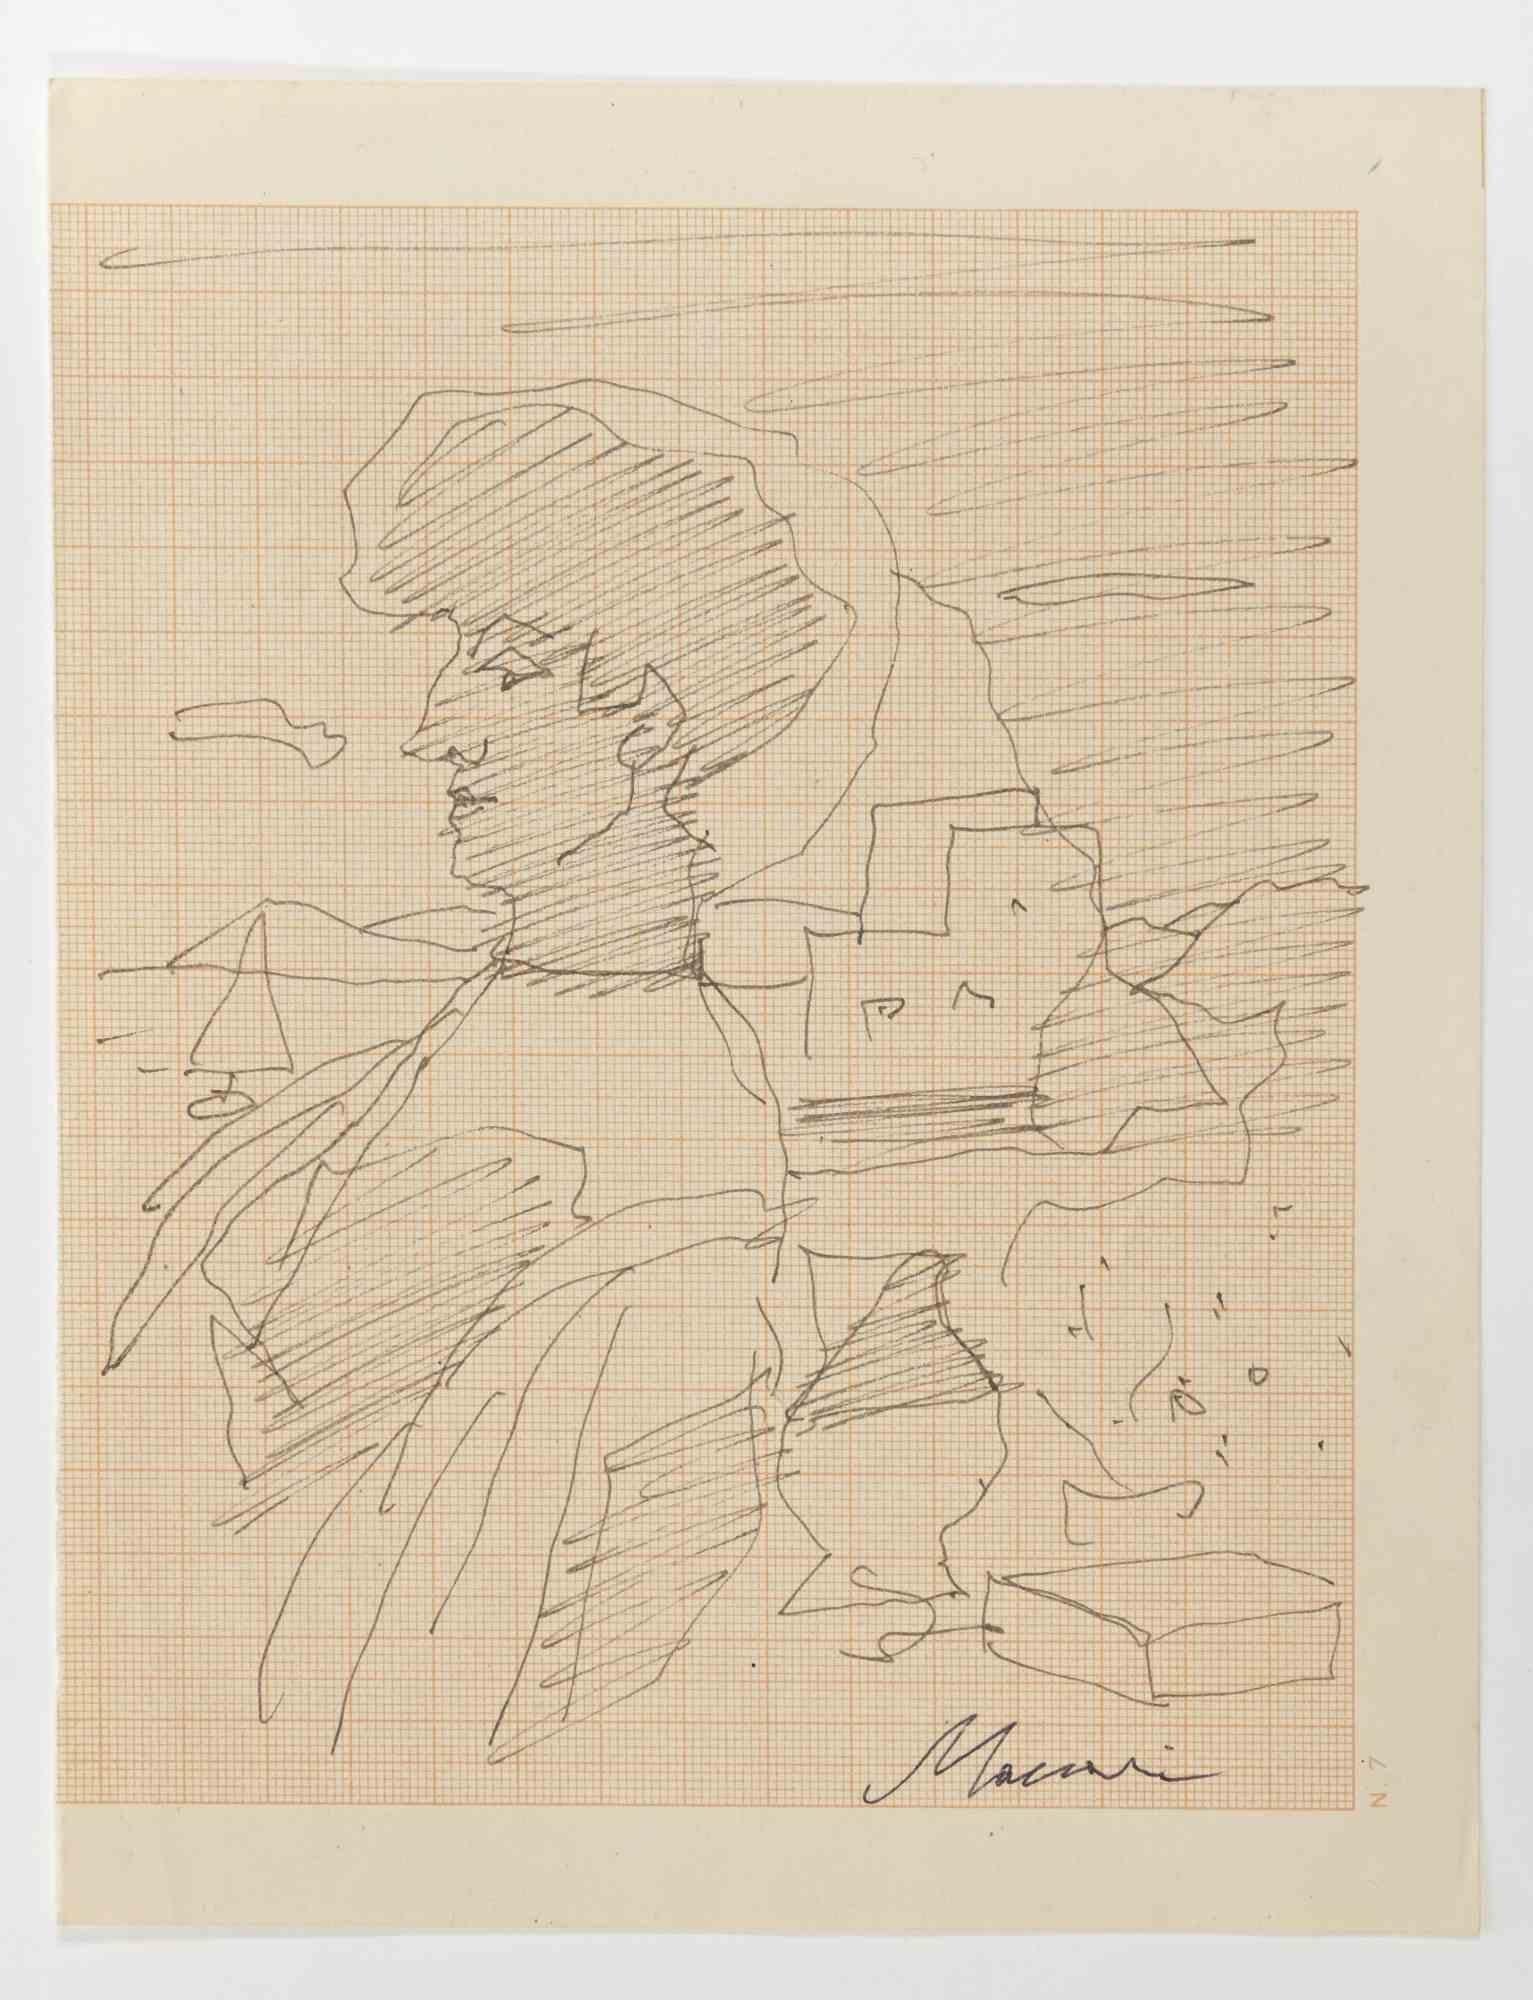 Woman in The Landscape is a Pen Drawing realized by Mino Maccari  (1924-1989) in the 1960s.

Hand-signed on the lower margin.

Good condition.

Mino Maccari (Siena, 1924-Rome, June 16, 1989) was an Italian writer, painter, engraver and journalist,